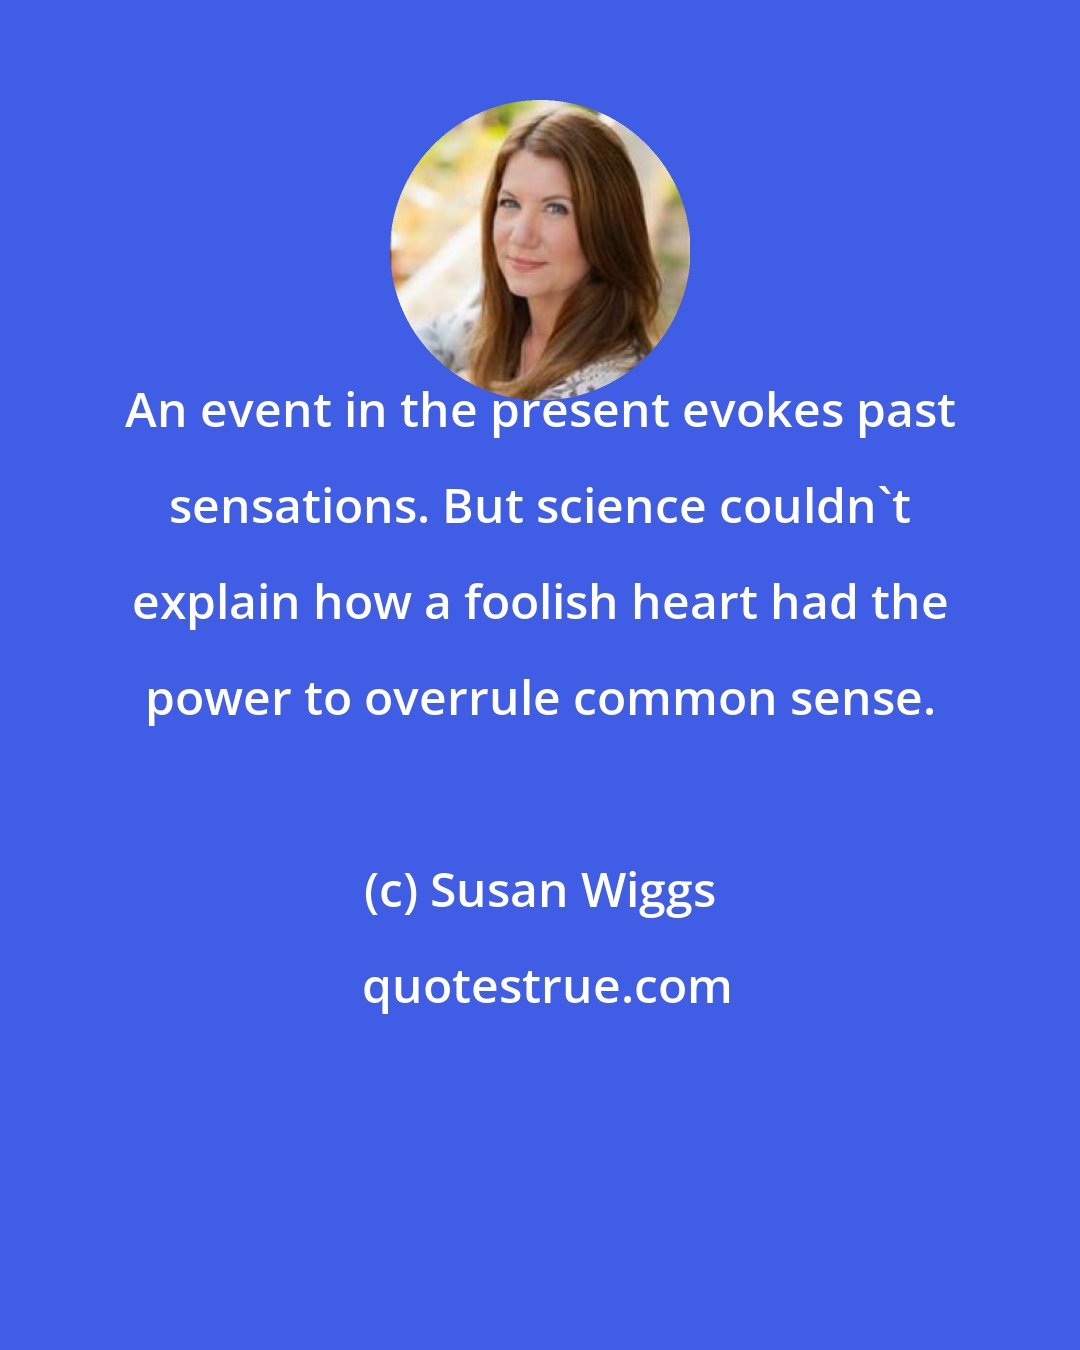 Susan Wiggs: An event in the present evokes past sensations. But science couldn't explain how a foolish heart had the power to overrule common sense.